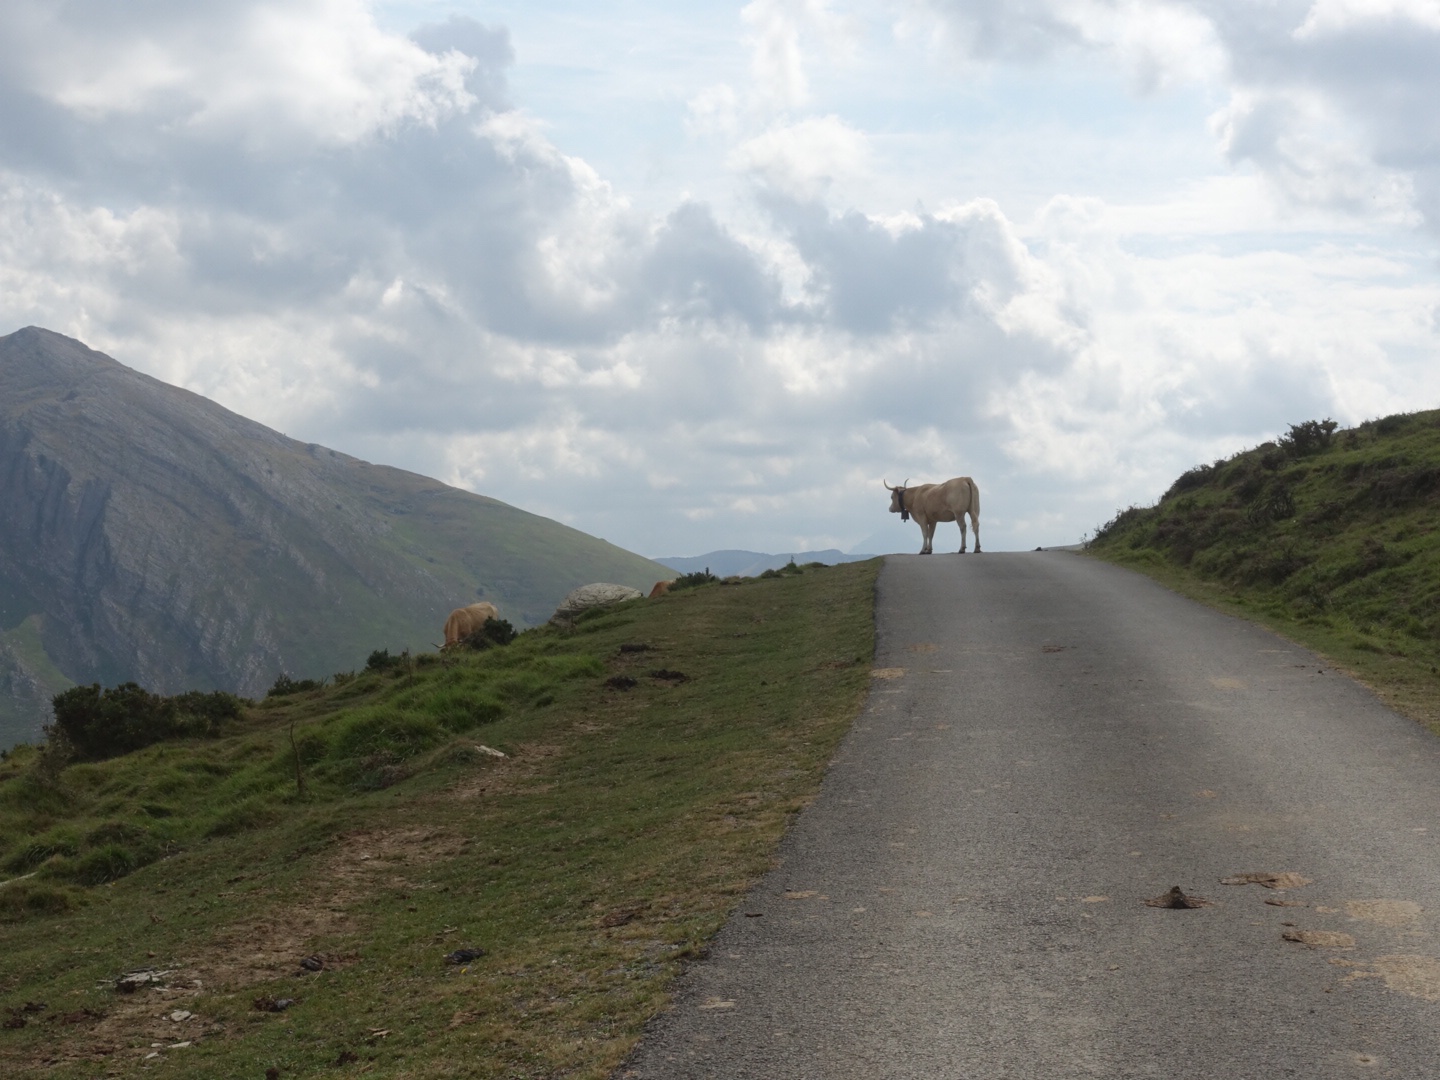 A mountain cow on the road